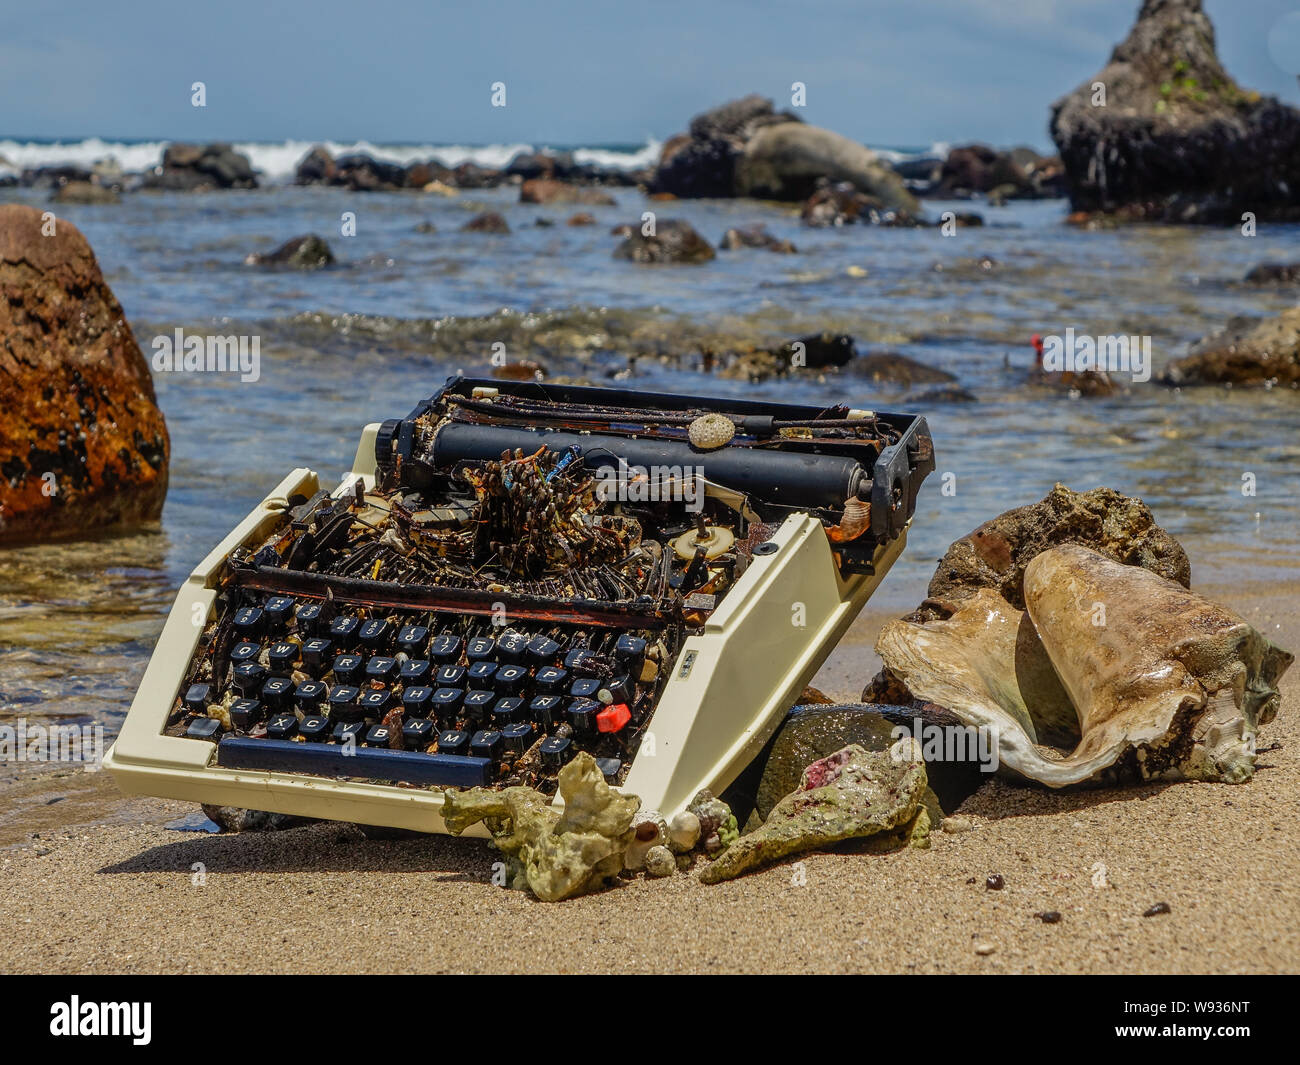 Bastimentos Island, Bocas del Toro, Panama - March 22, 2017: Old typewriter stranded on the shore of a paradisiacal beach Stock Photo